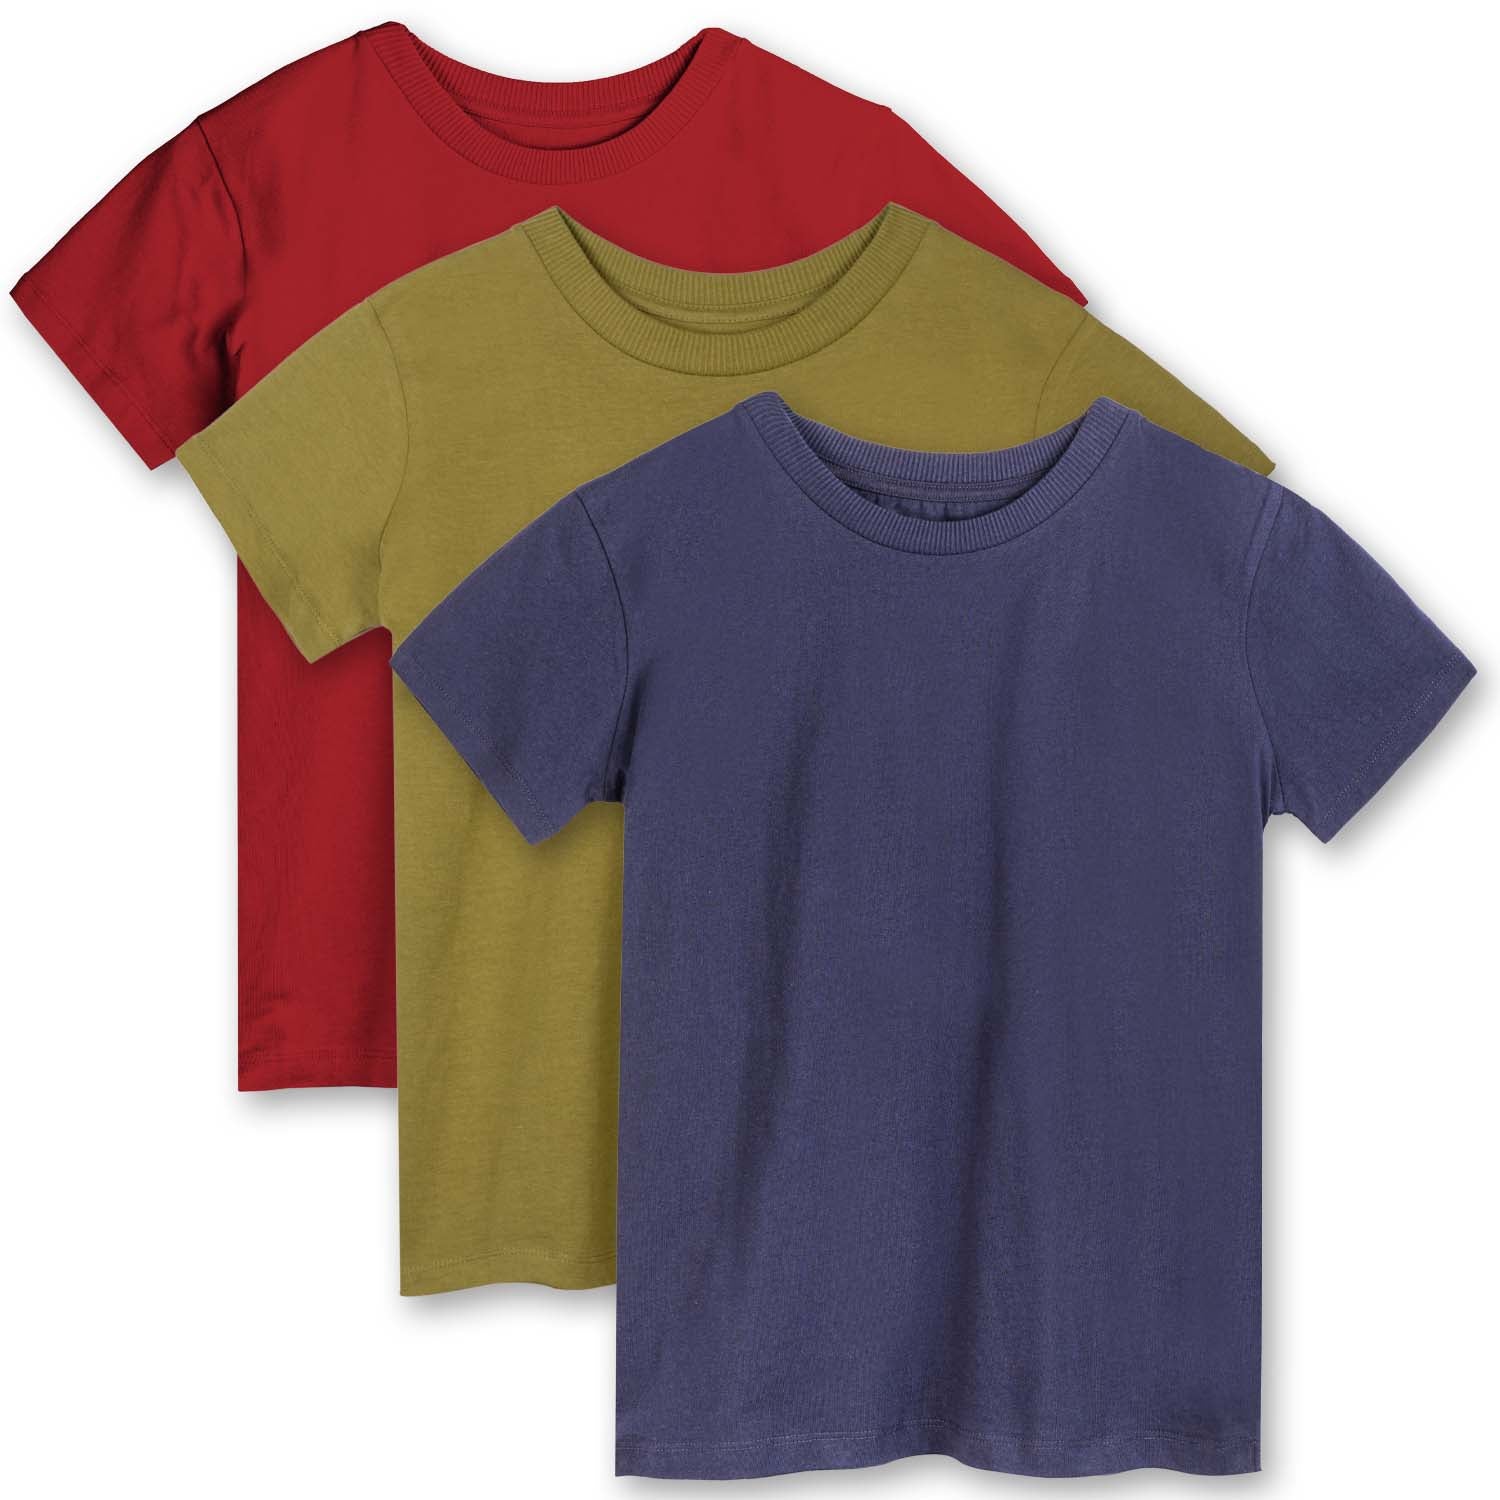 Organic Cotton 3 - Shirts Kids Mightly - Extended Length Pack T-Shirts